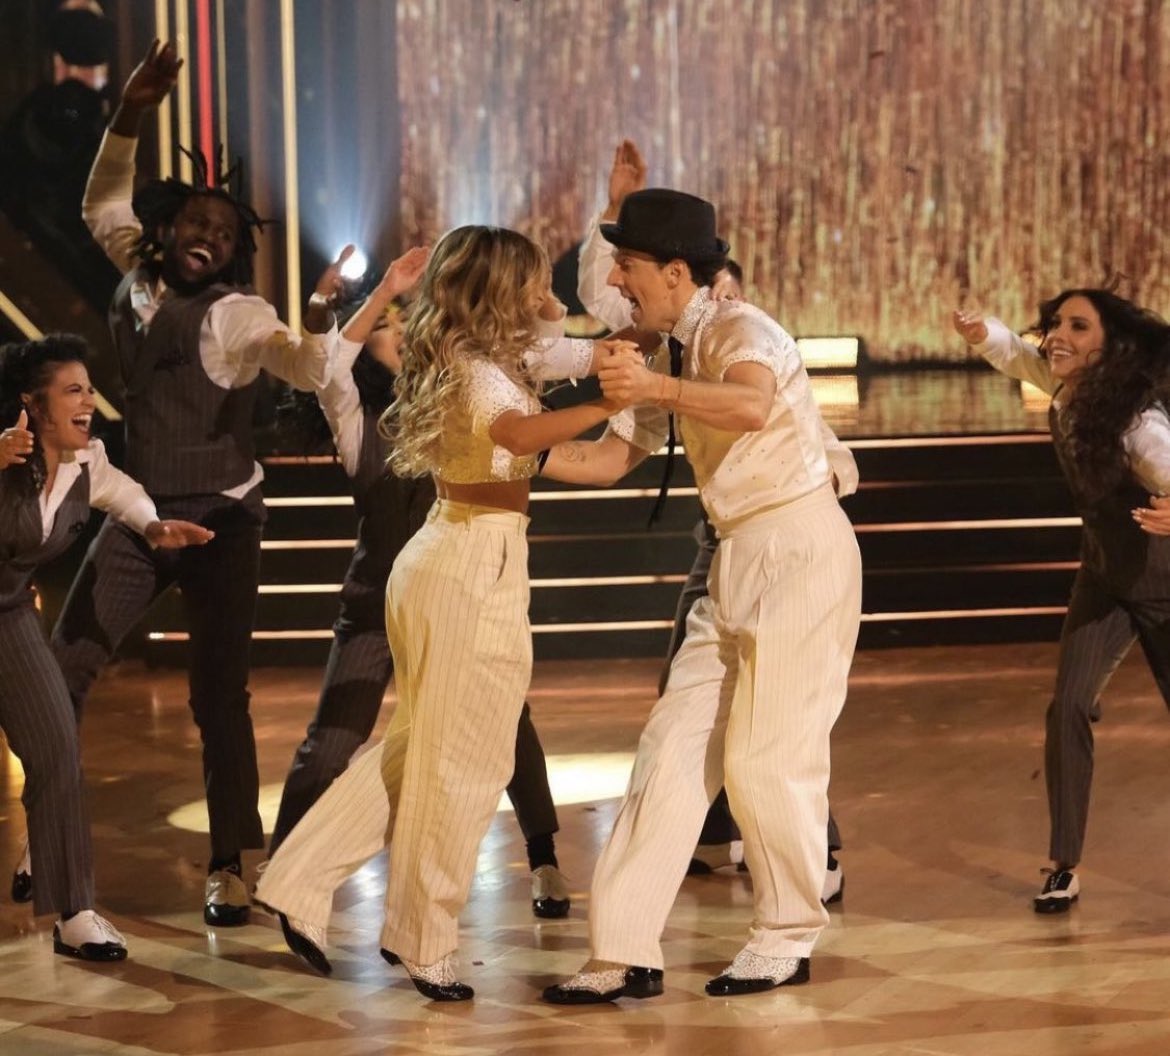 Jason Mraz you will always be famous!
#DancingWithTheStars #DWTS